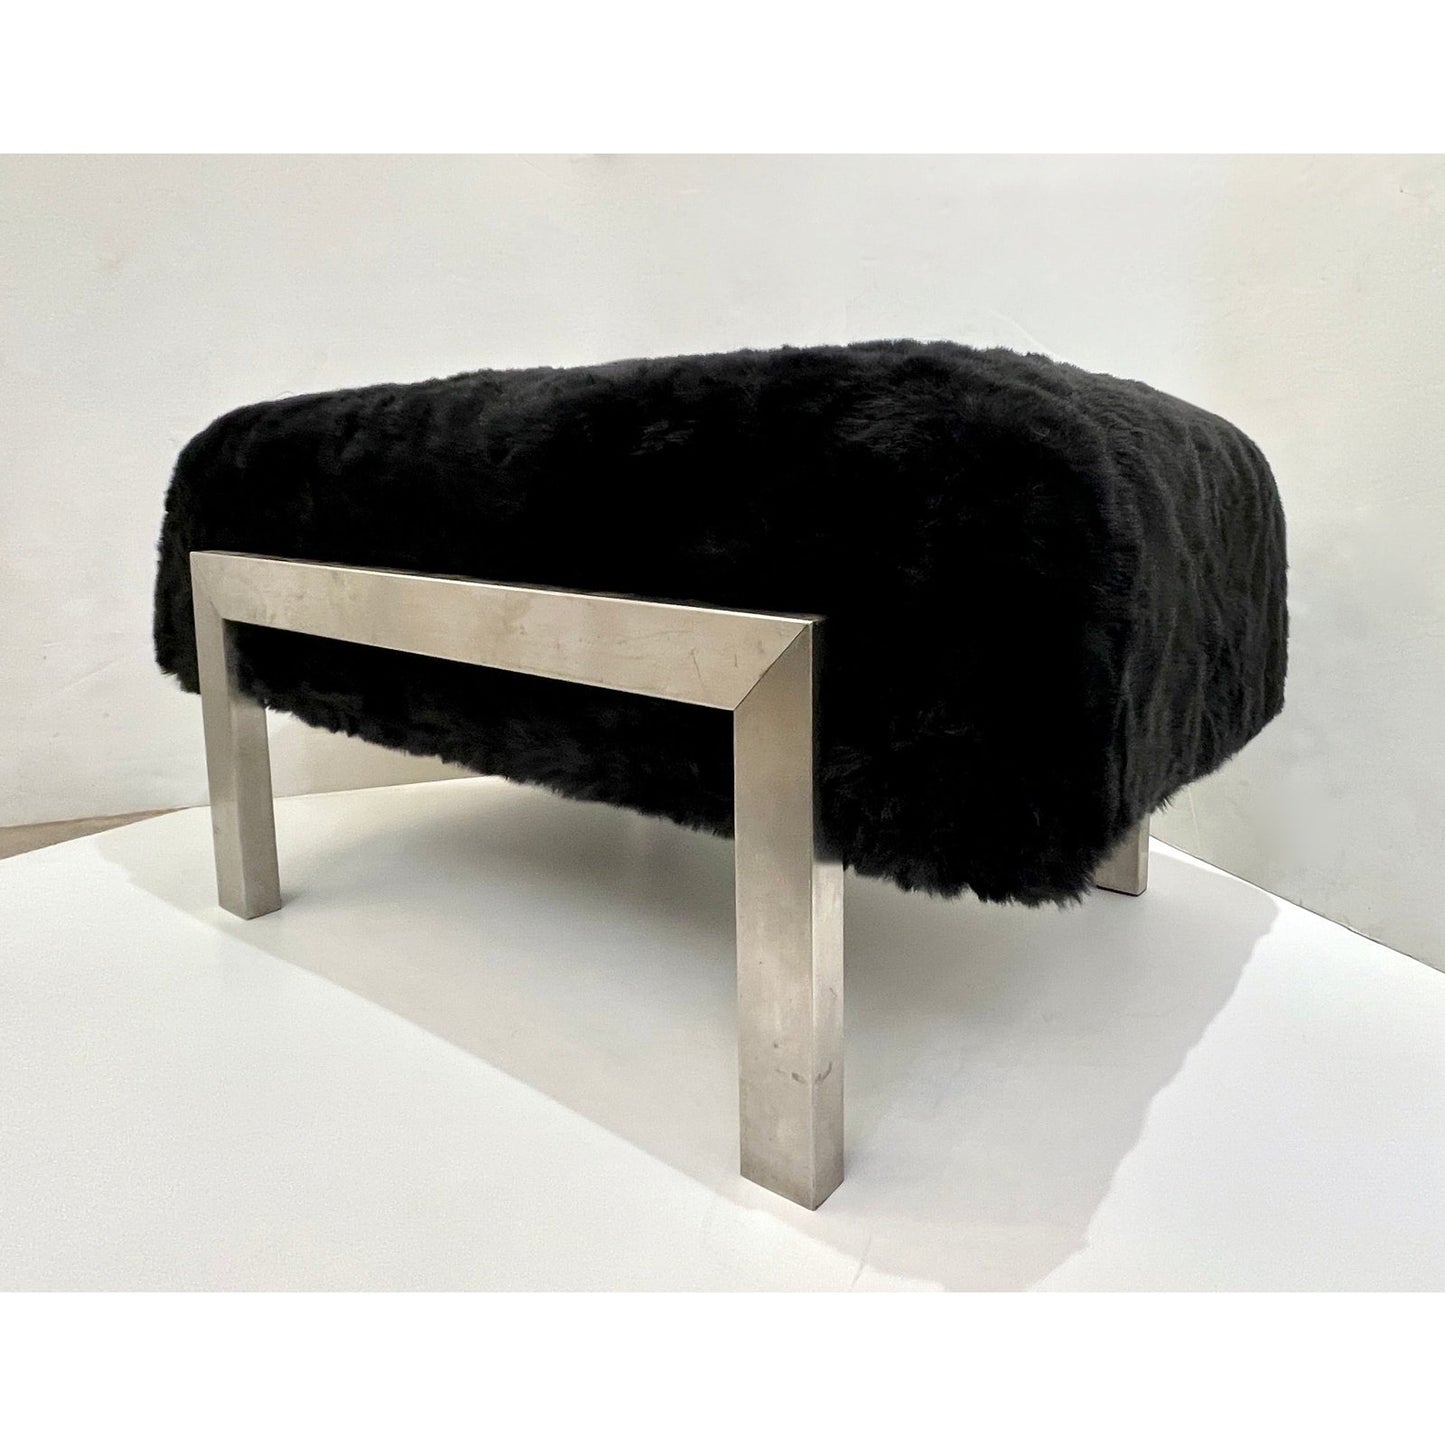 1970s Italian Vintage Black Faux Fur Steel Bed Stool Bench - 1 Pair available